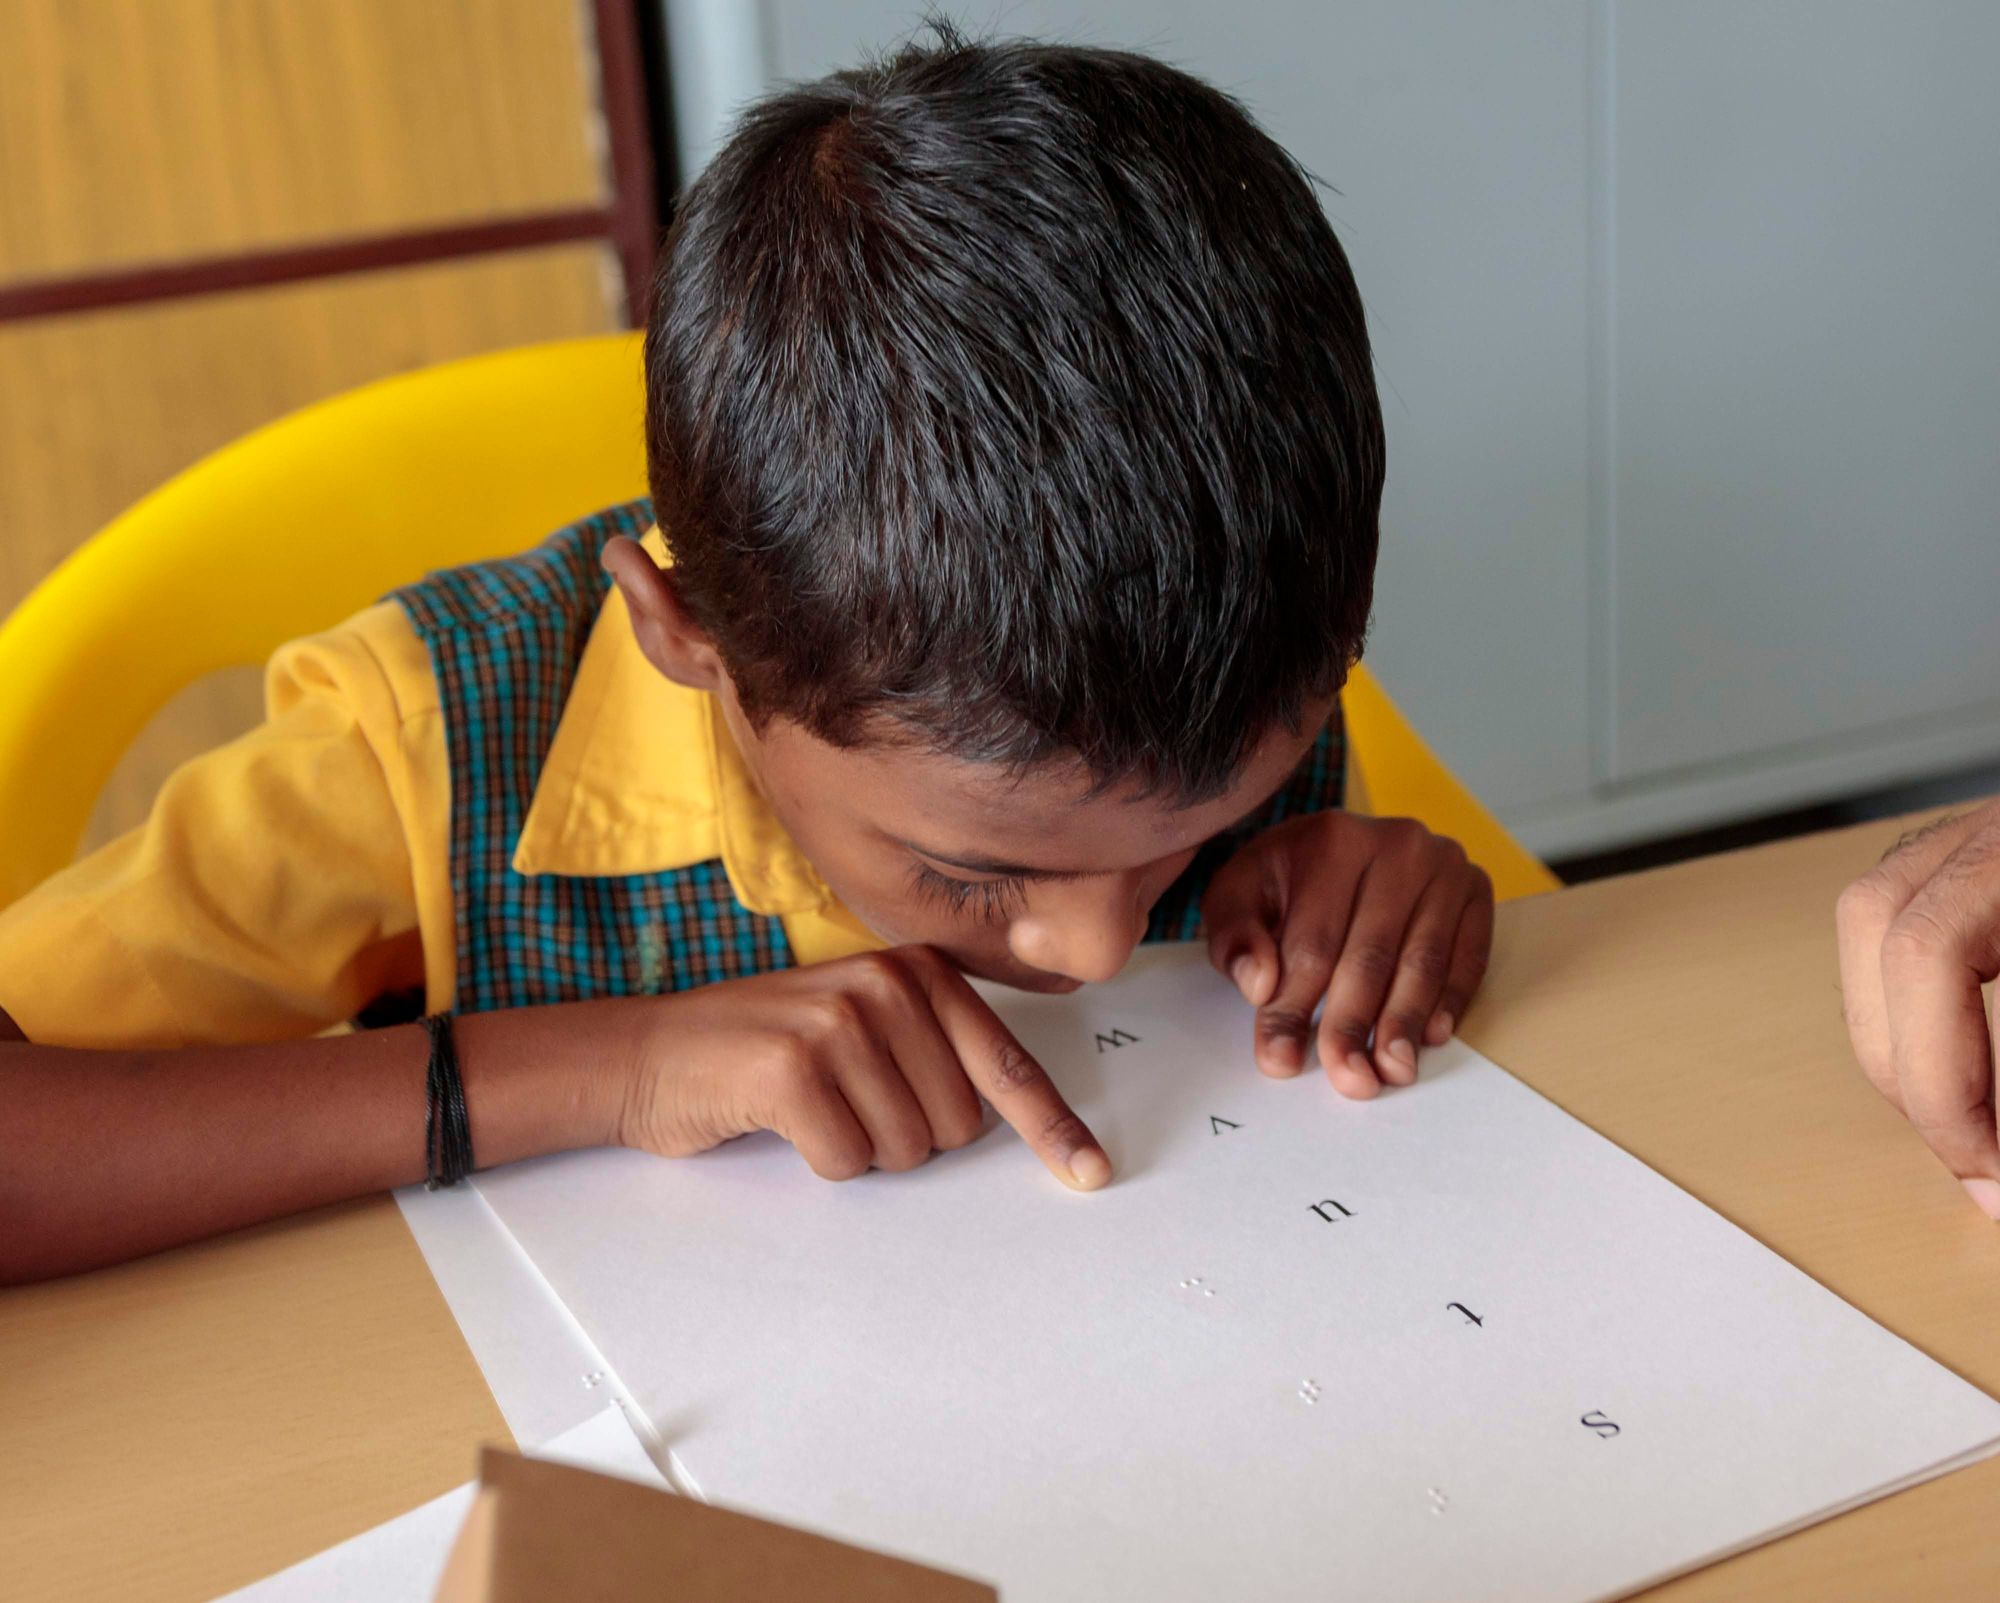 A child reads the English alphabet from a sheet of paper with Braille text